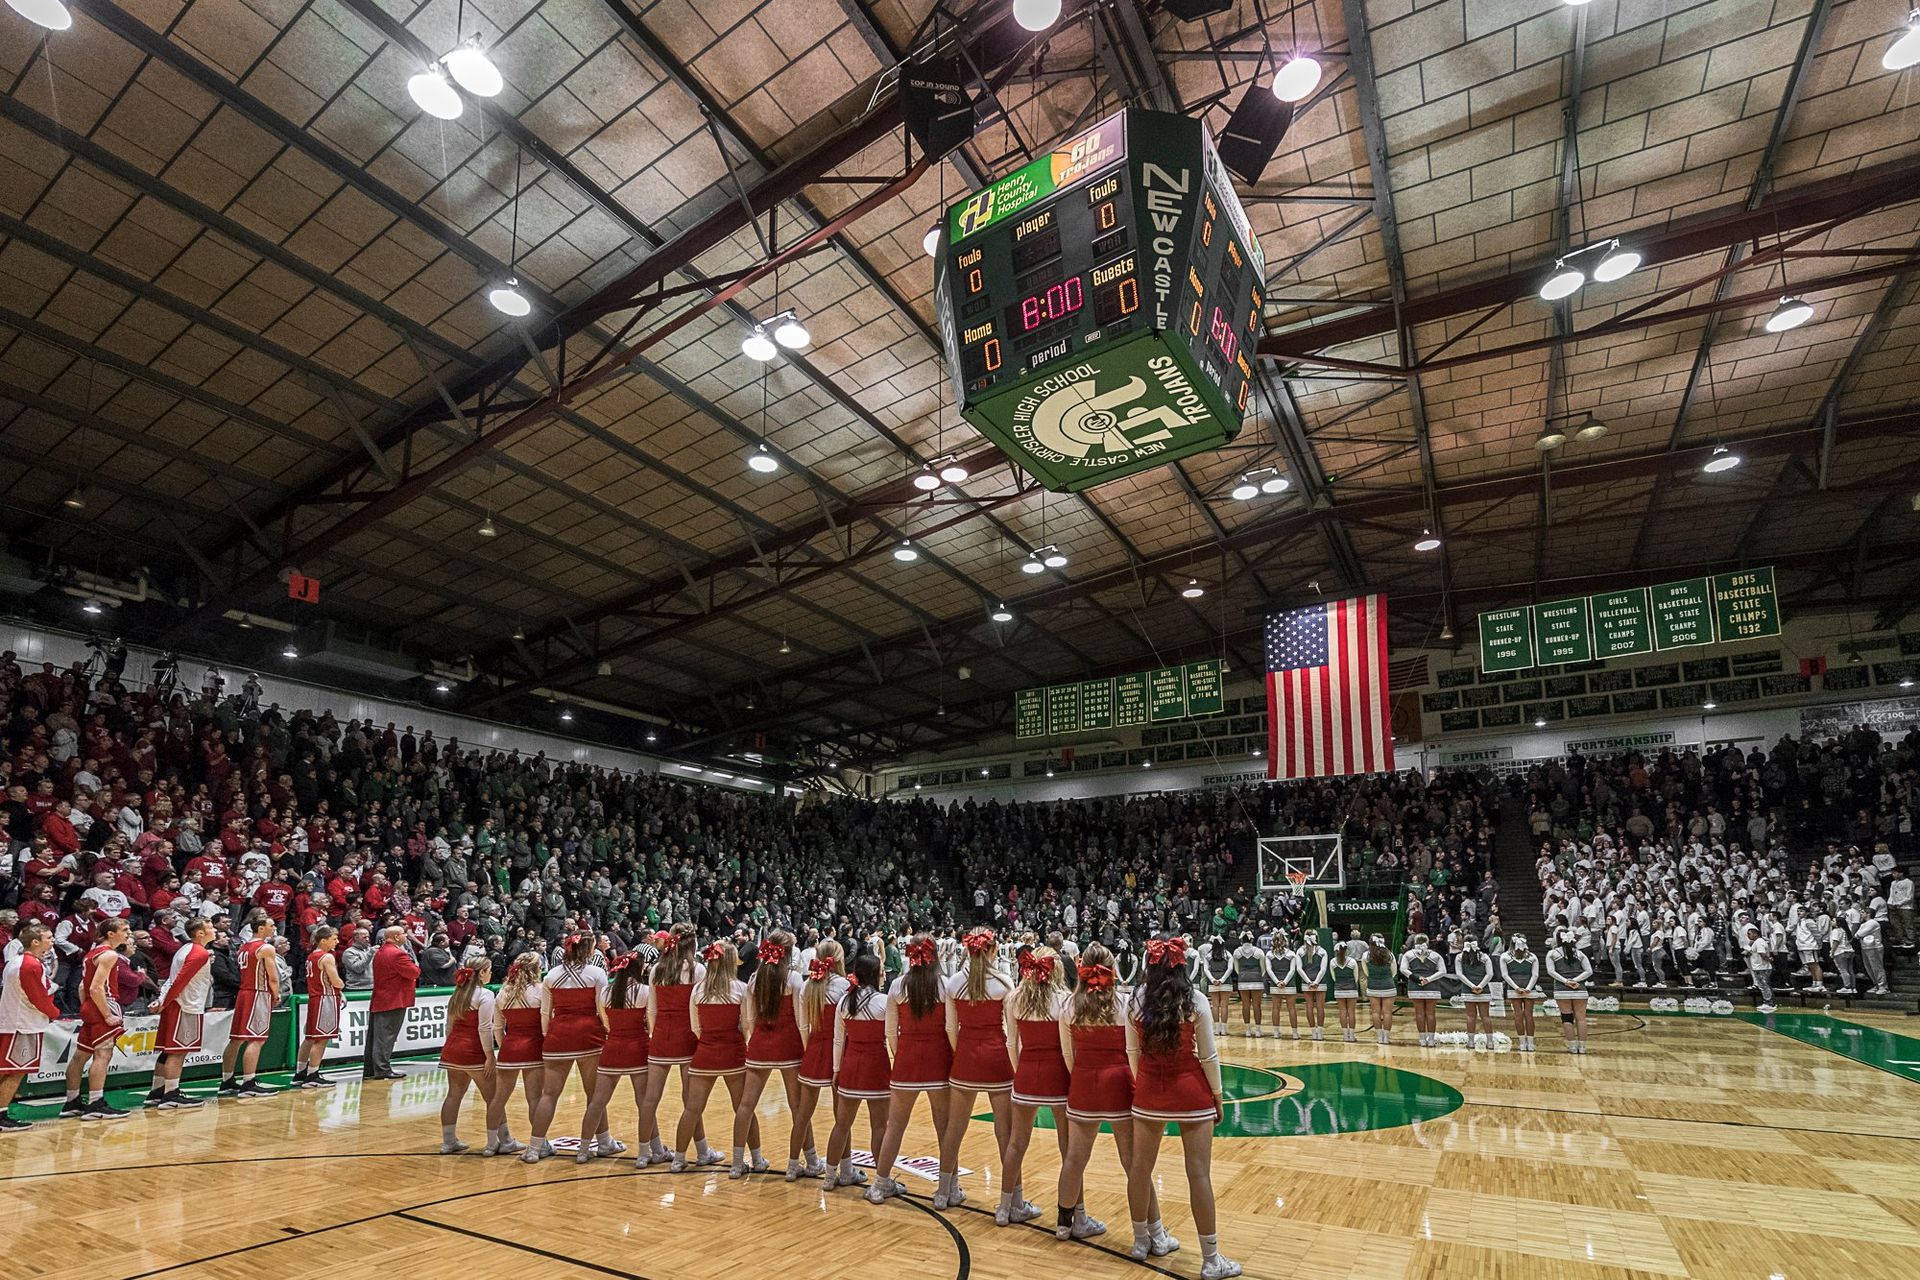 World's Largest High School Basketball Gym: world record in New Castle, Indiana